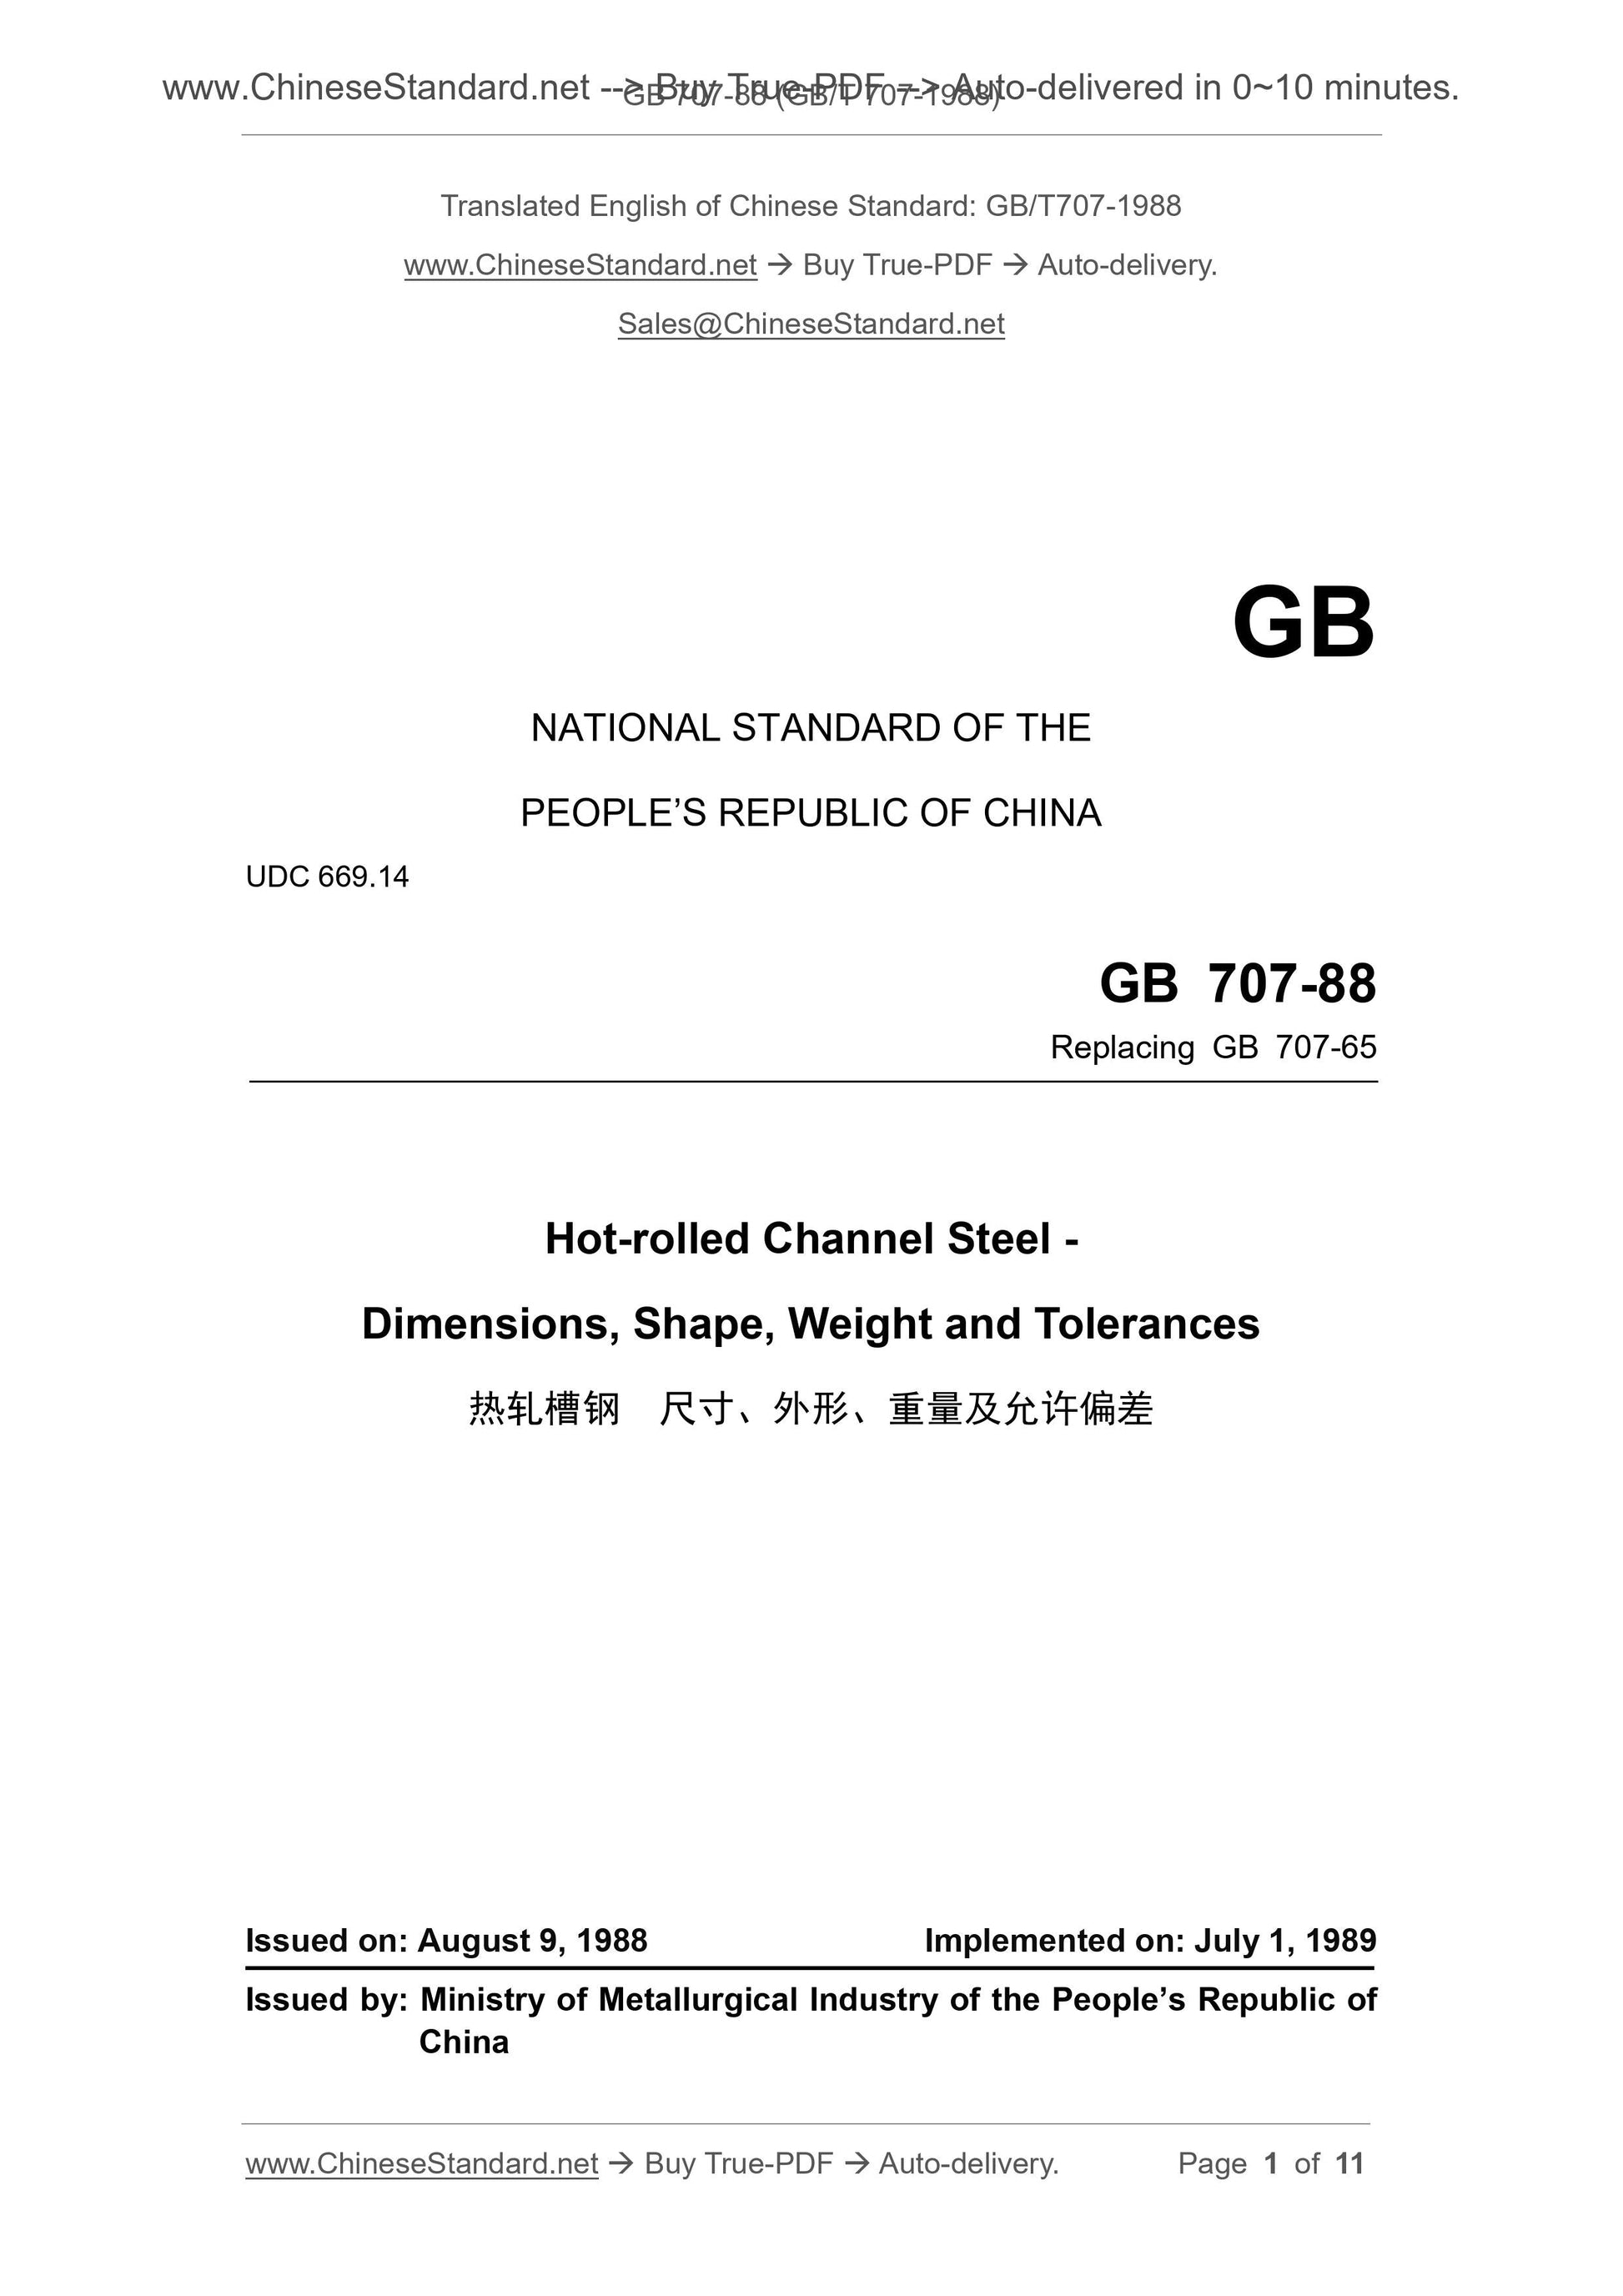 GB/T 707-1988 Page 1